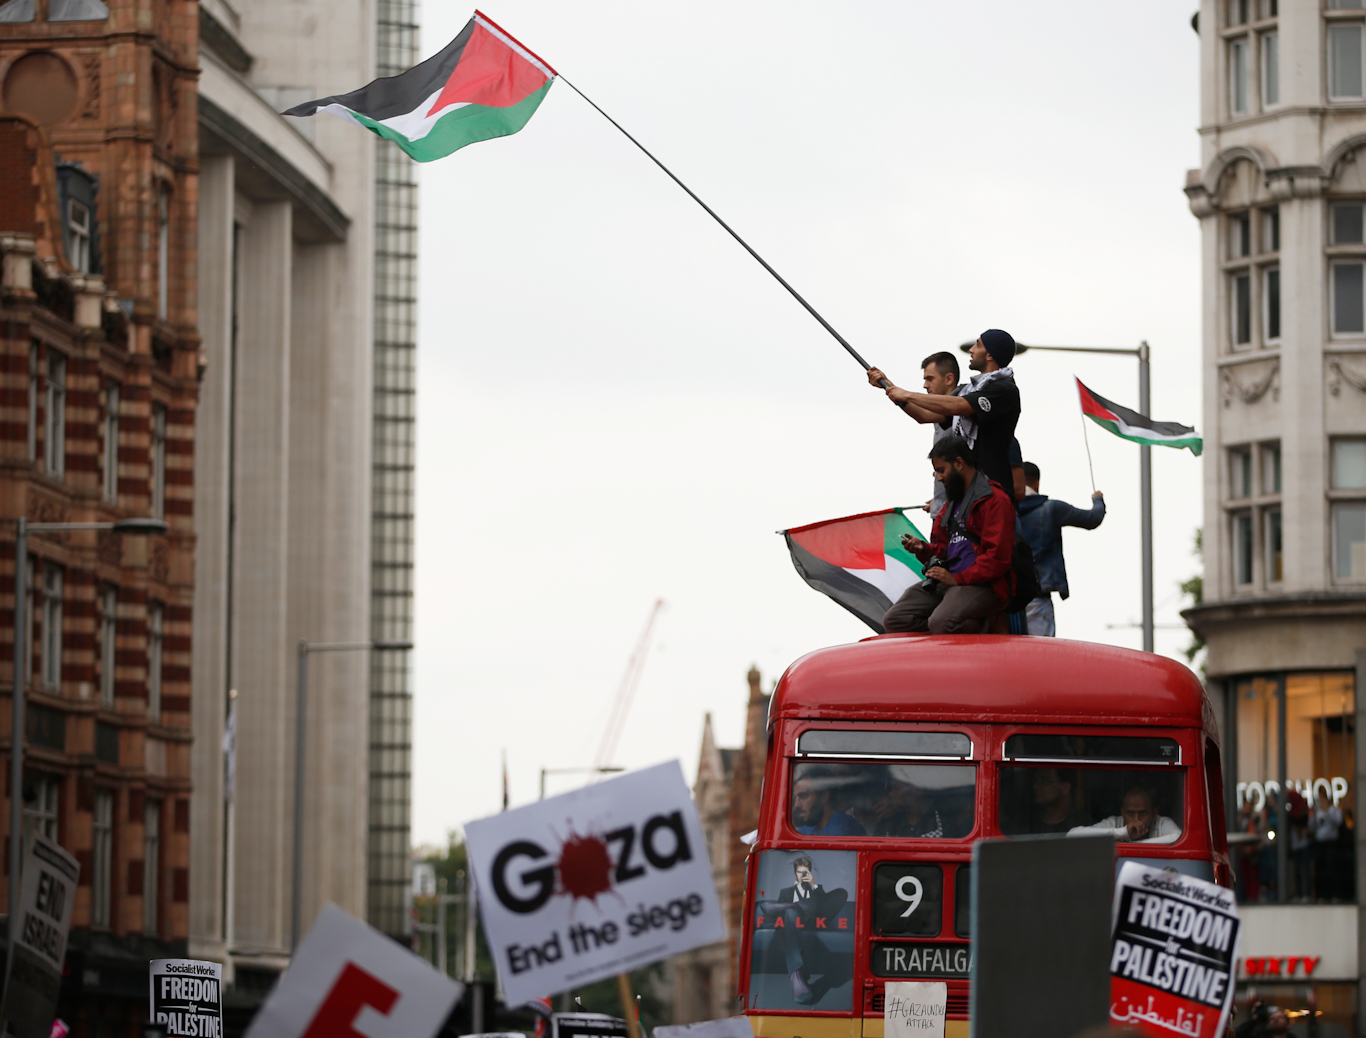 Demonstrators stand on top of London Bus during a protest near the Israeli embassy over its bombing of Gaza, July 11, 2014. Alastair Grant | AP